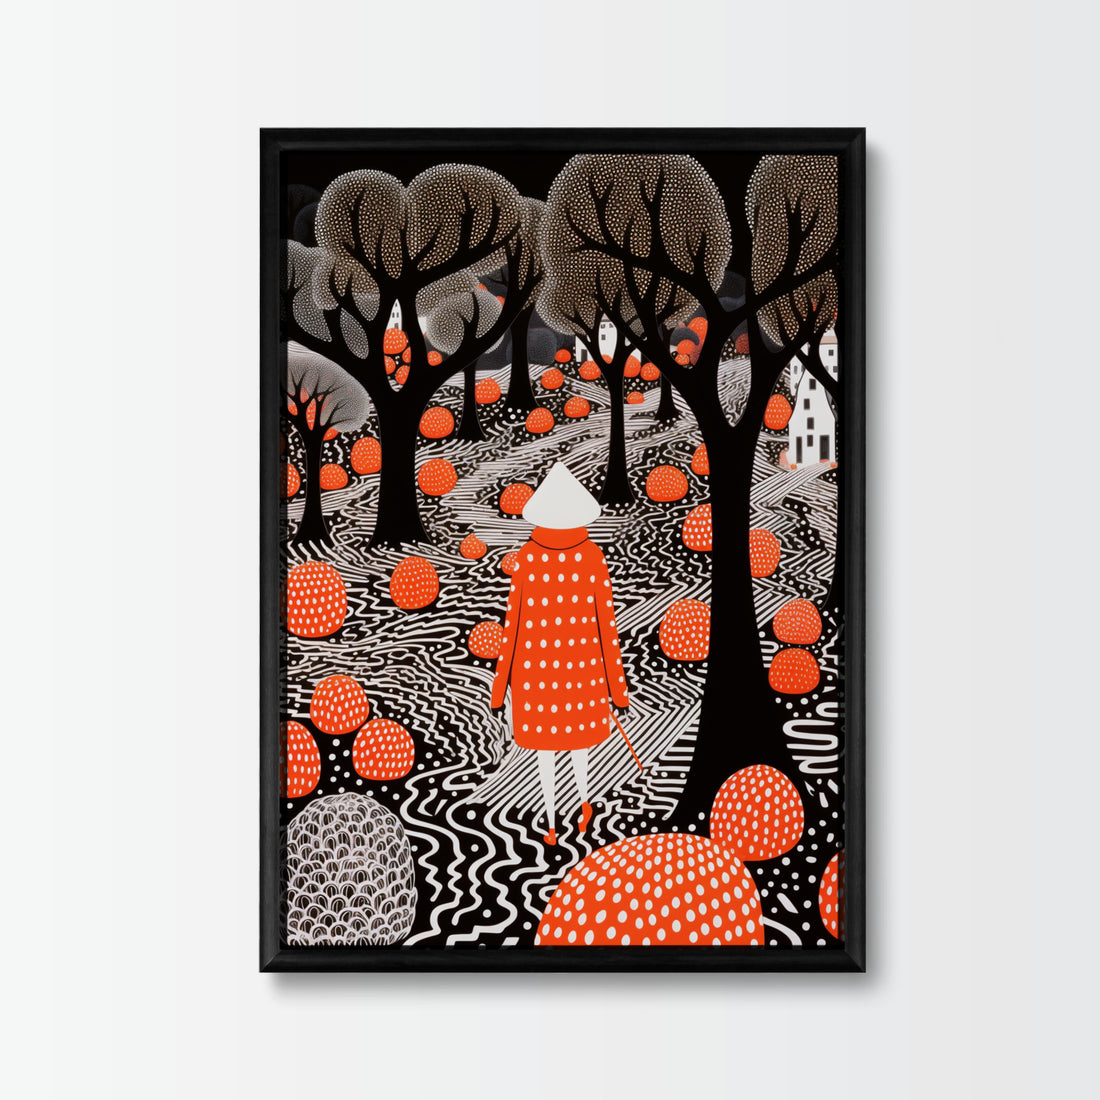 Poster Wanderer Polka Dot - Add sophistication to your home